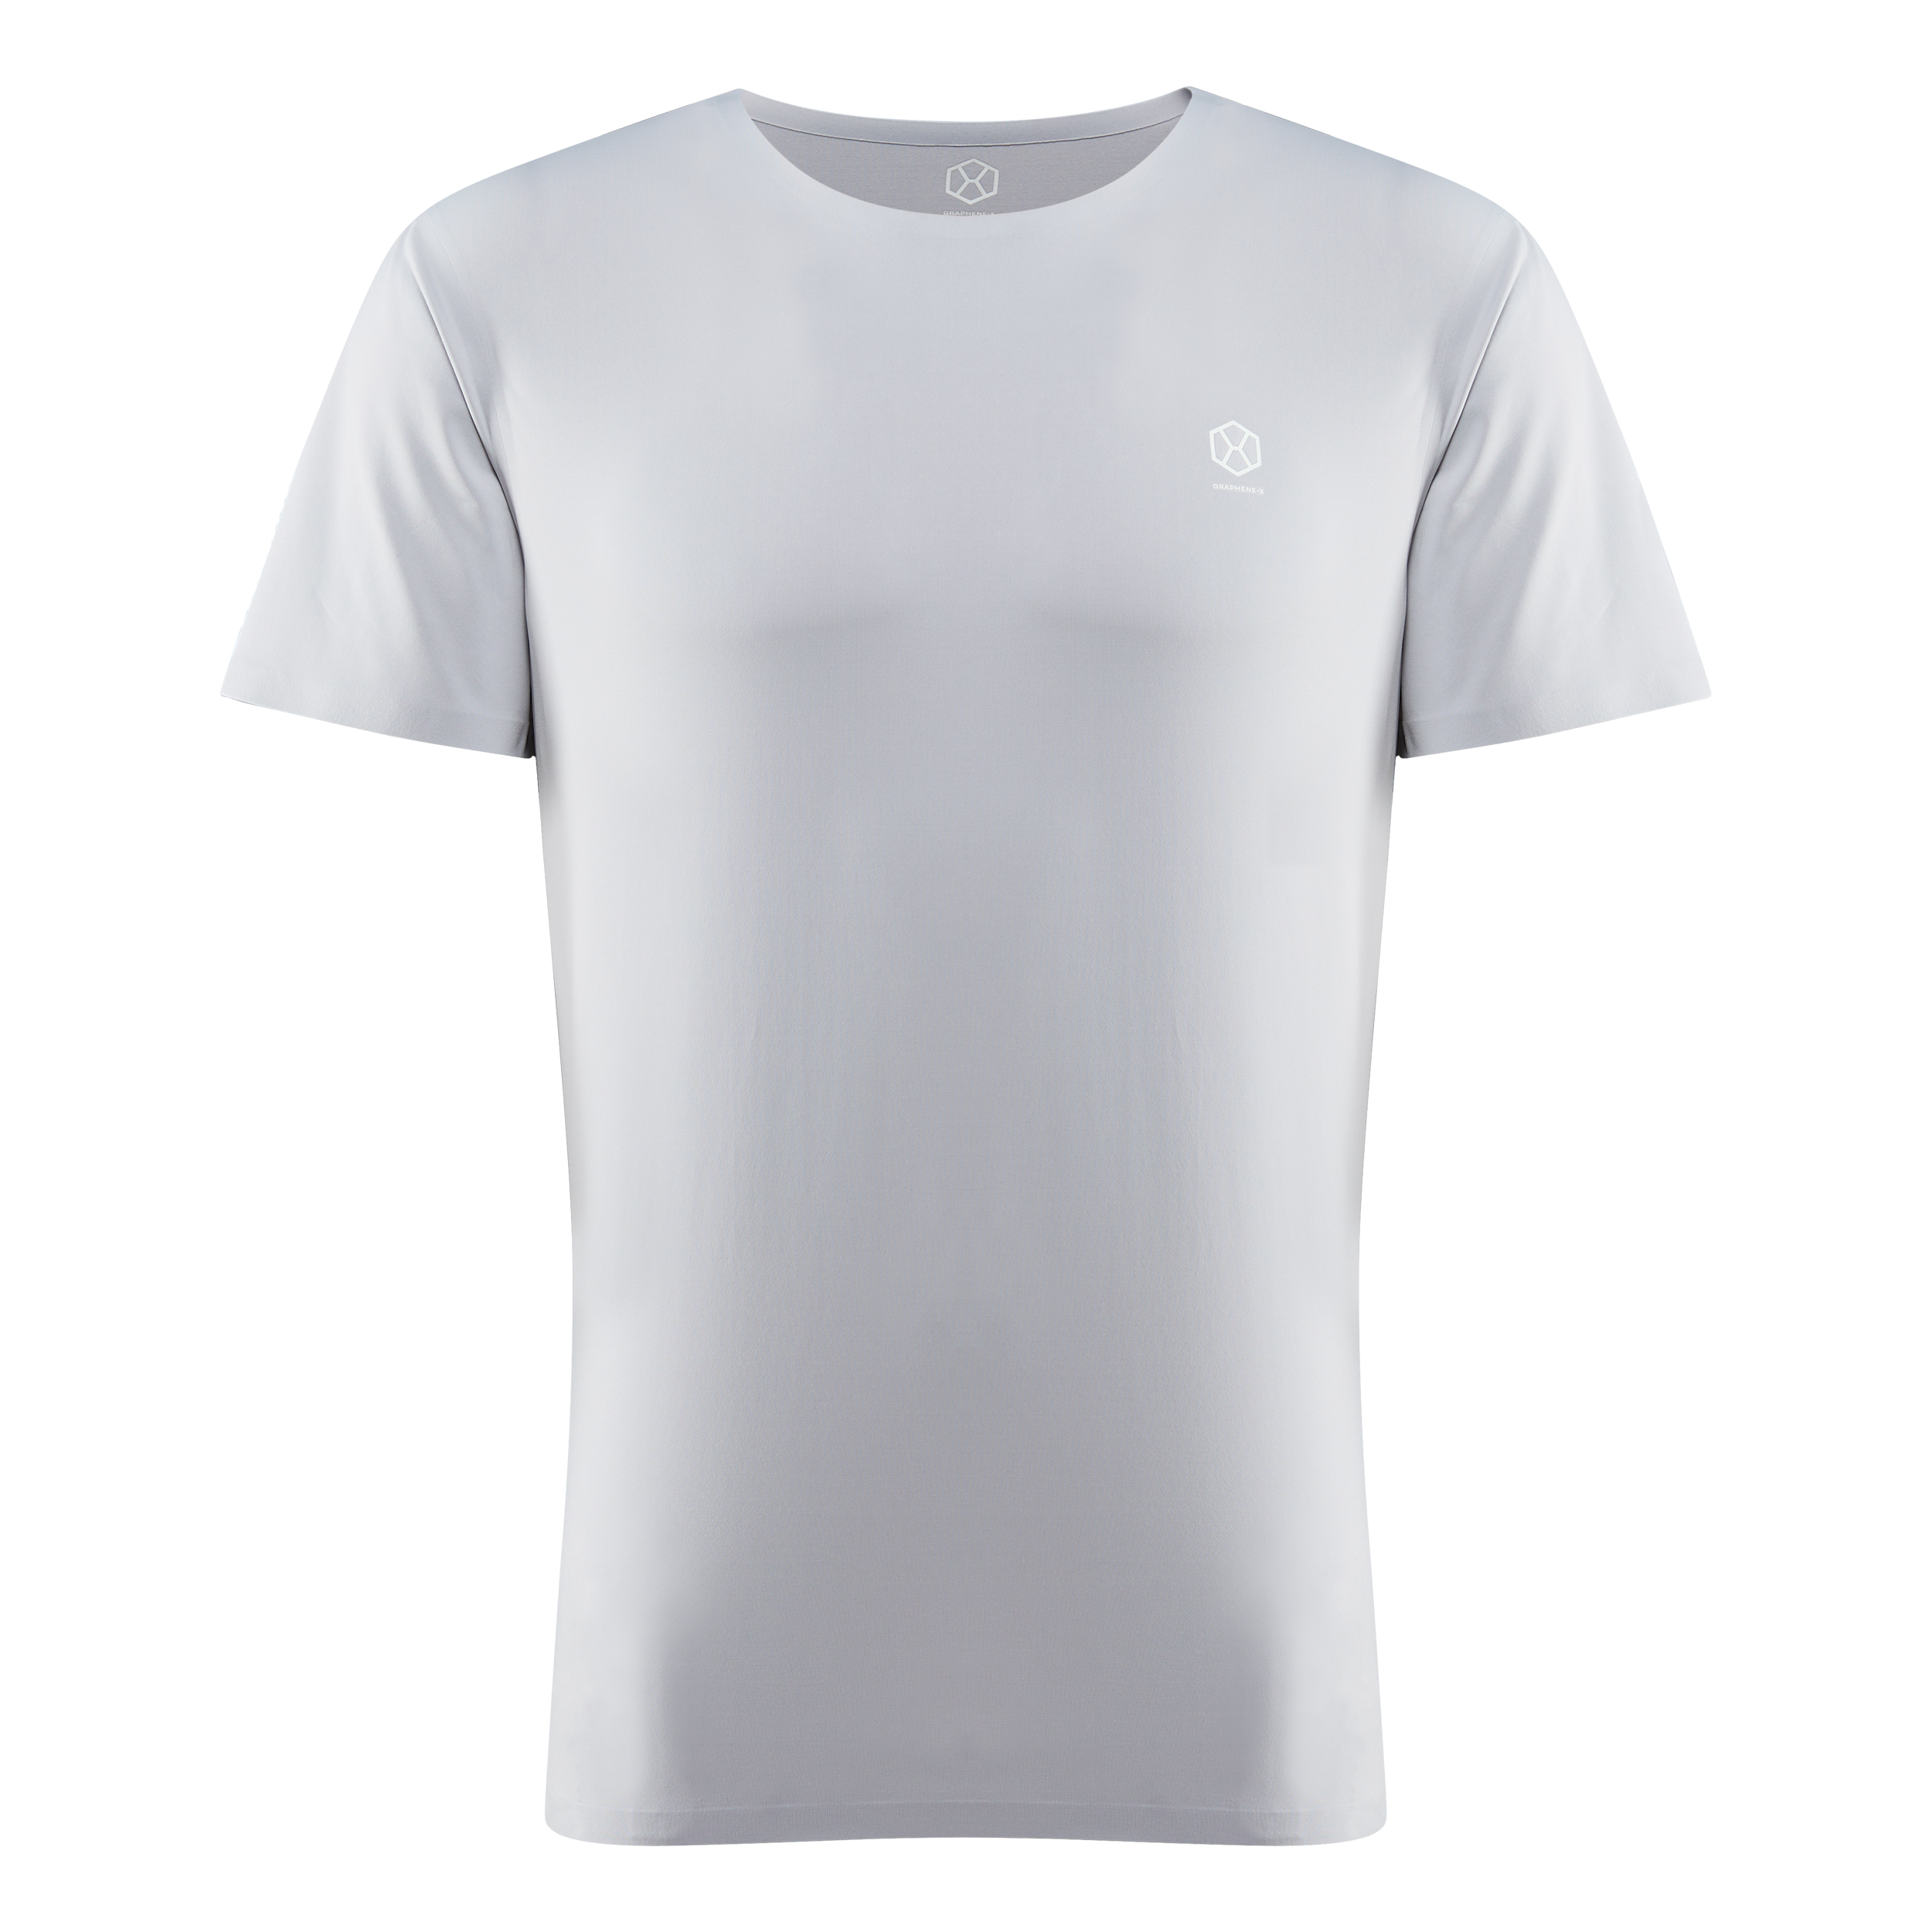 Graphene-X Mens Layer-X Short Sleeve Shirt | Graphene Integrated Fabric | Anti-smell Anti-UV Technology for Extra Protection